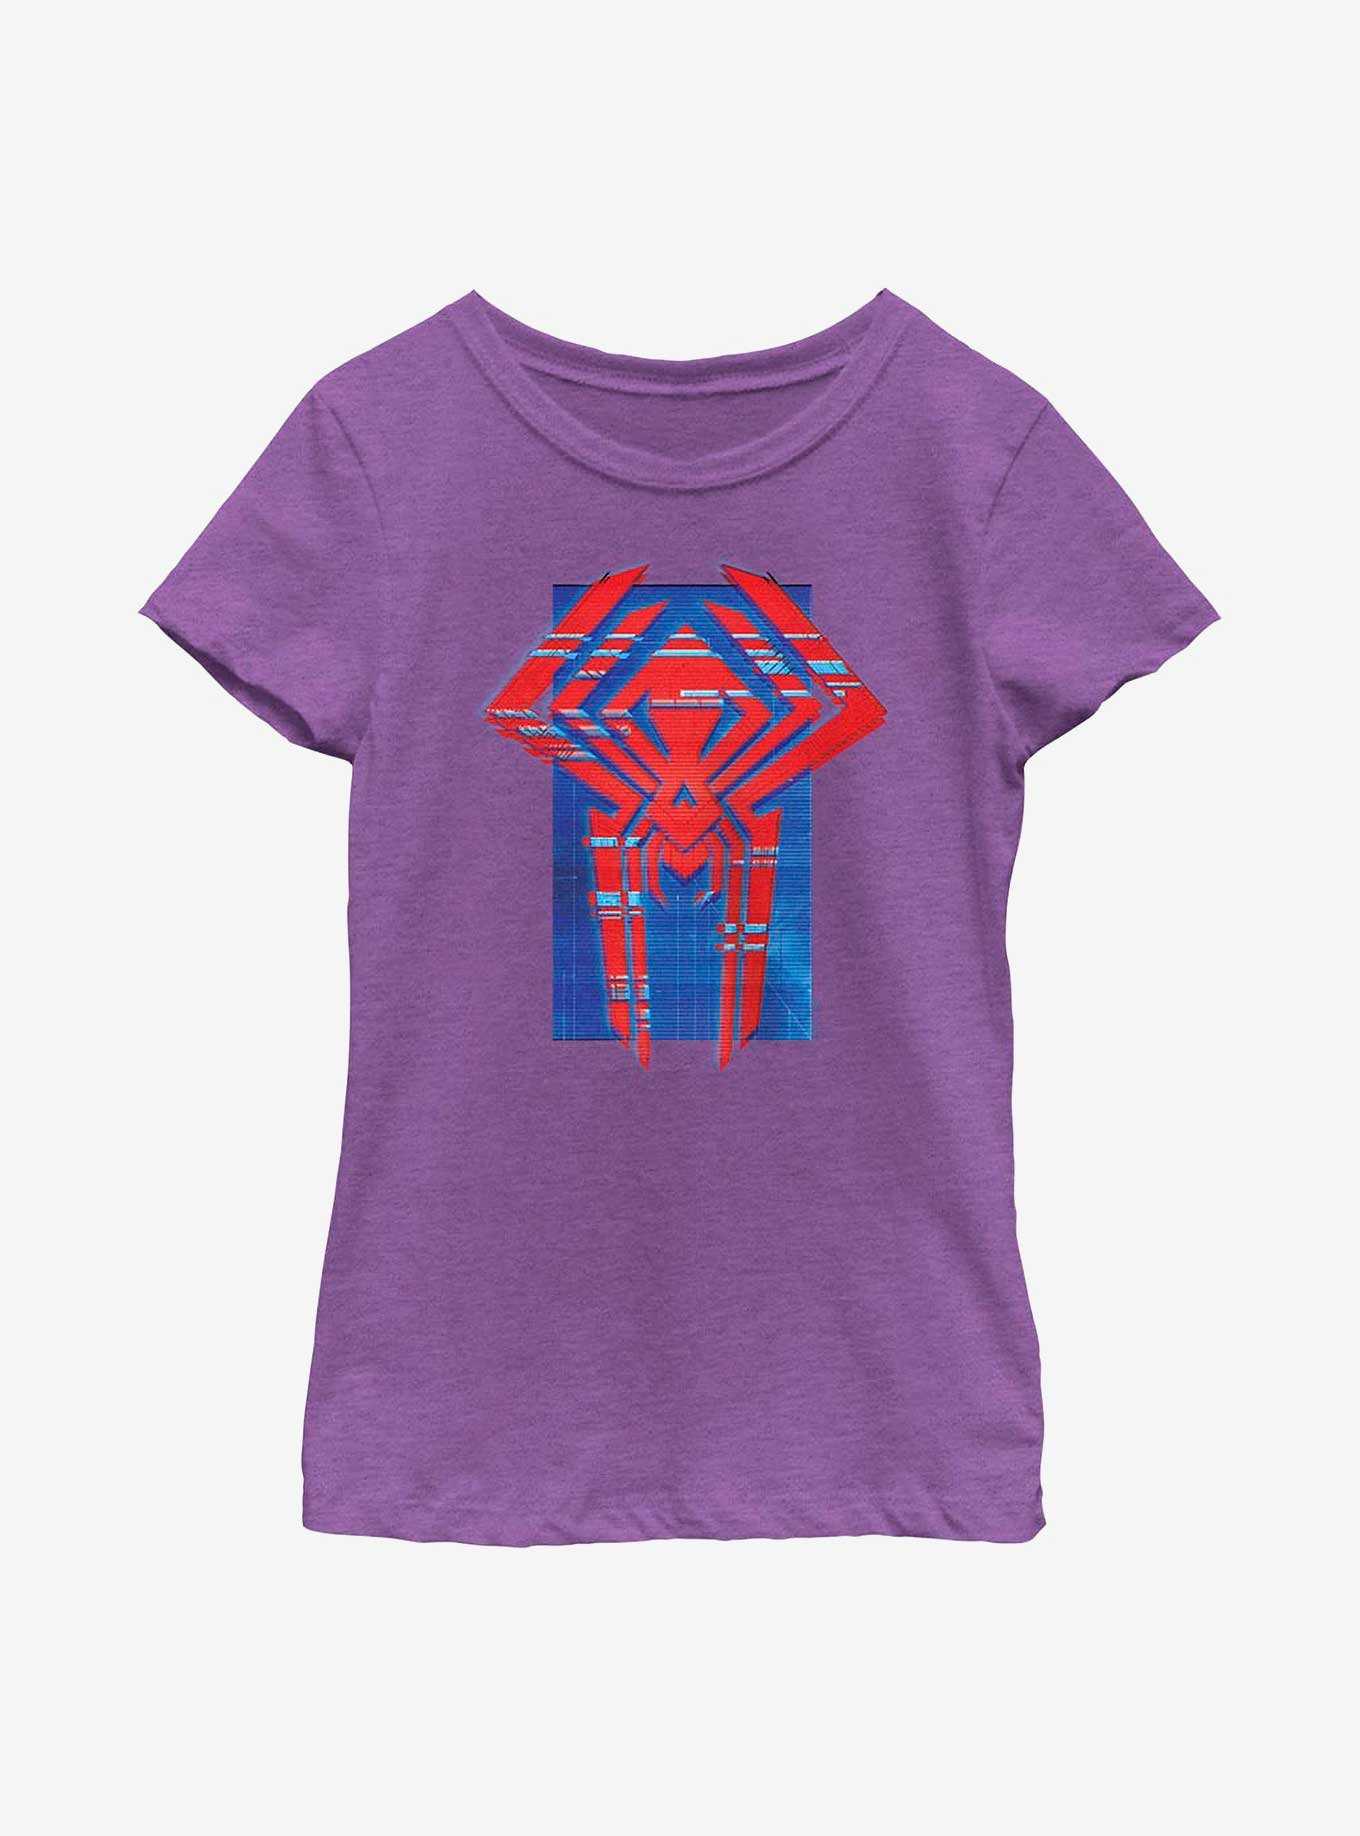 Marvel Spider-Man: Across the Spider-Verse Glitchy Miguel O'Hara Logo Youth Girls T-Shirt, , hi-res